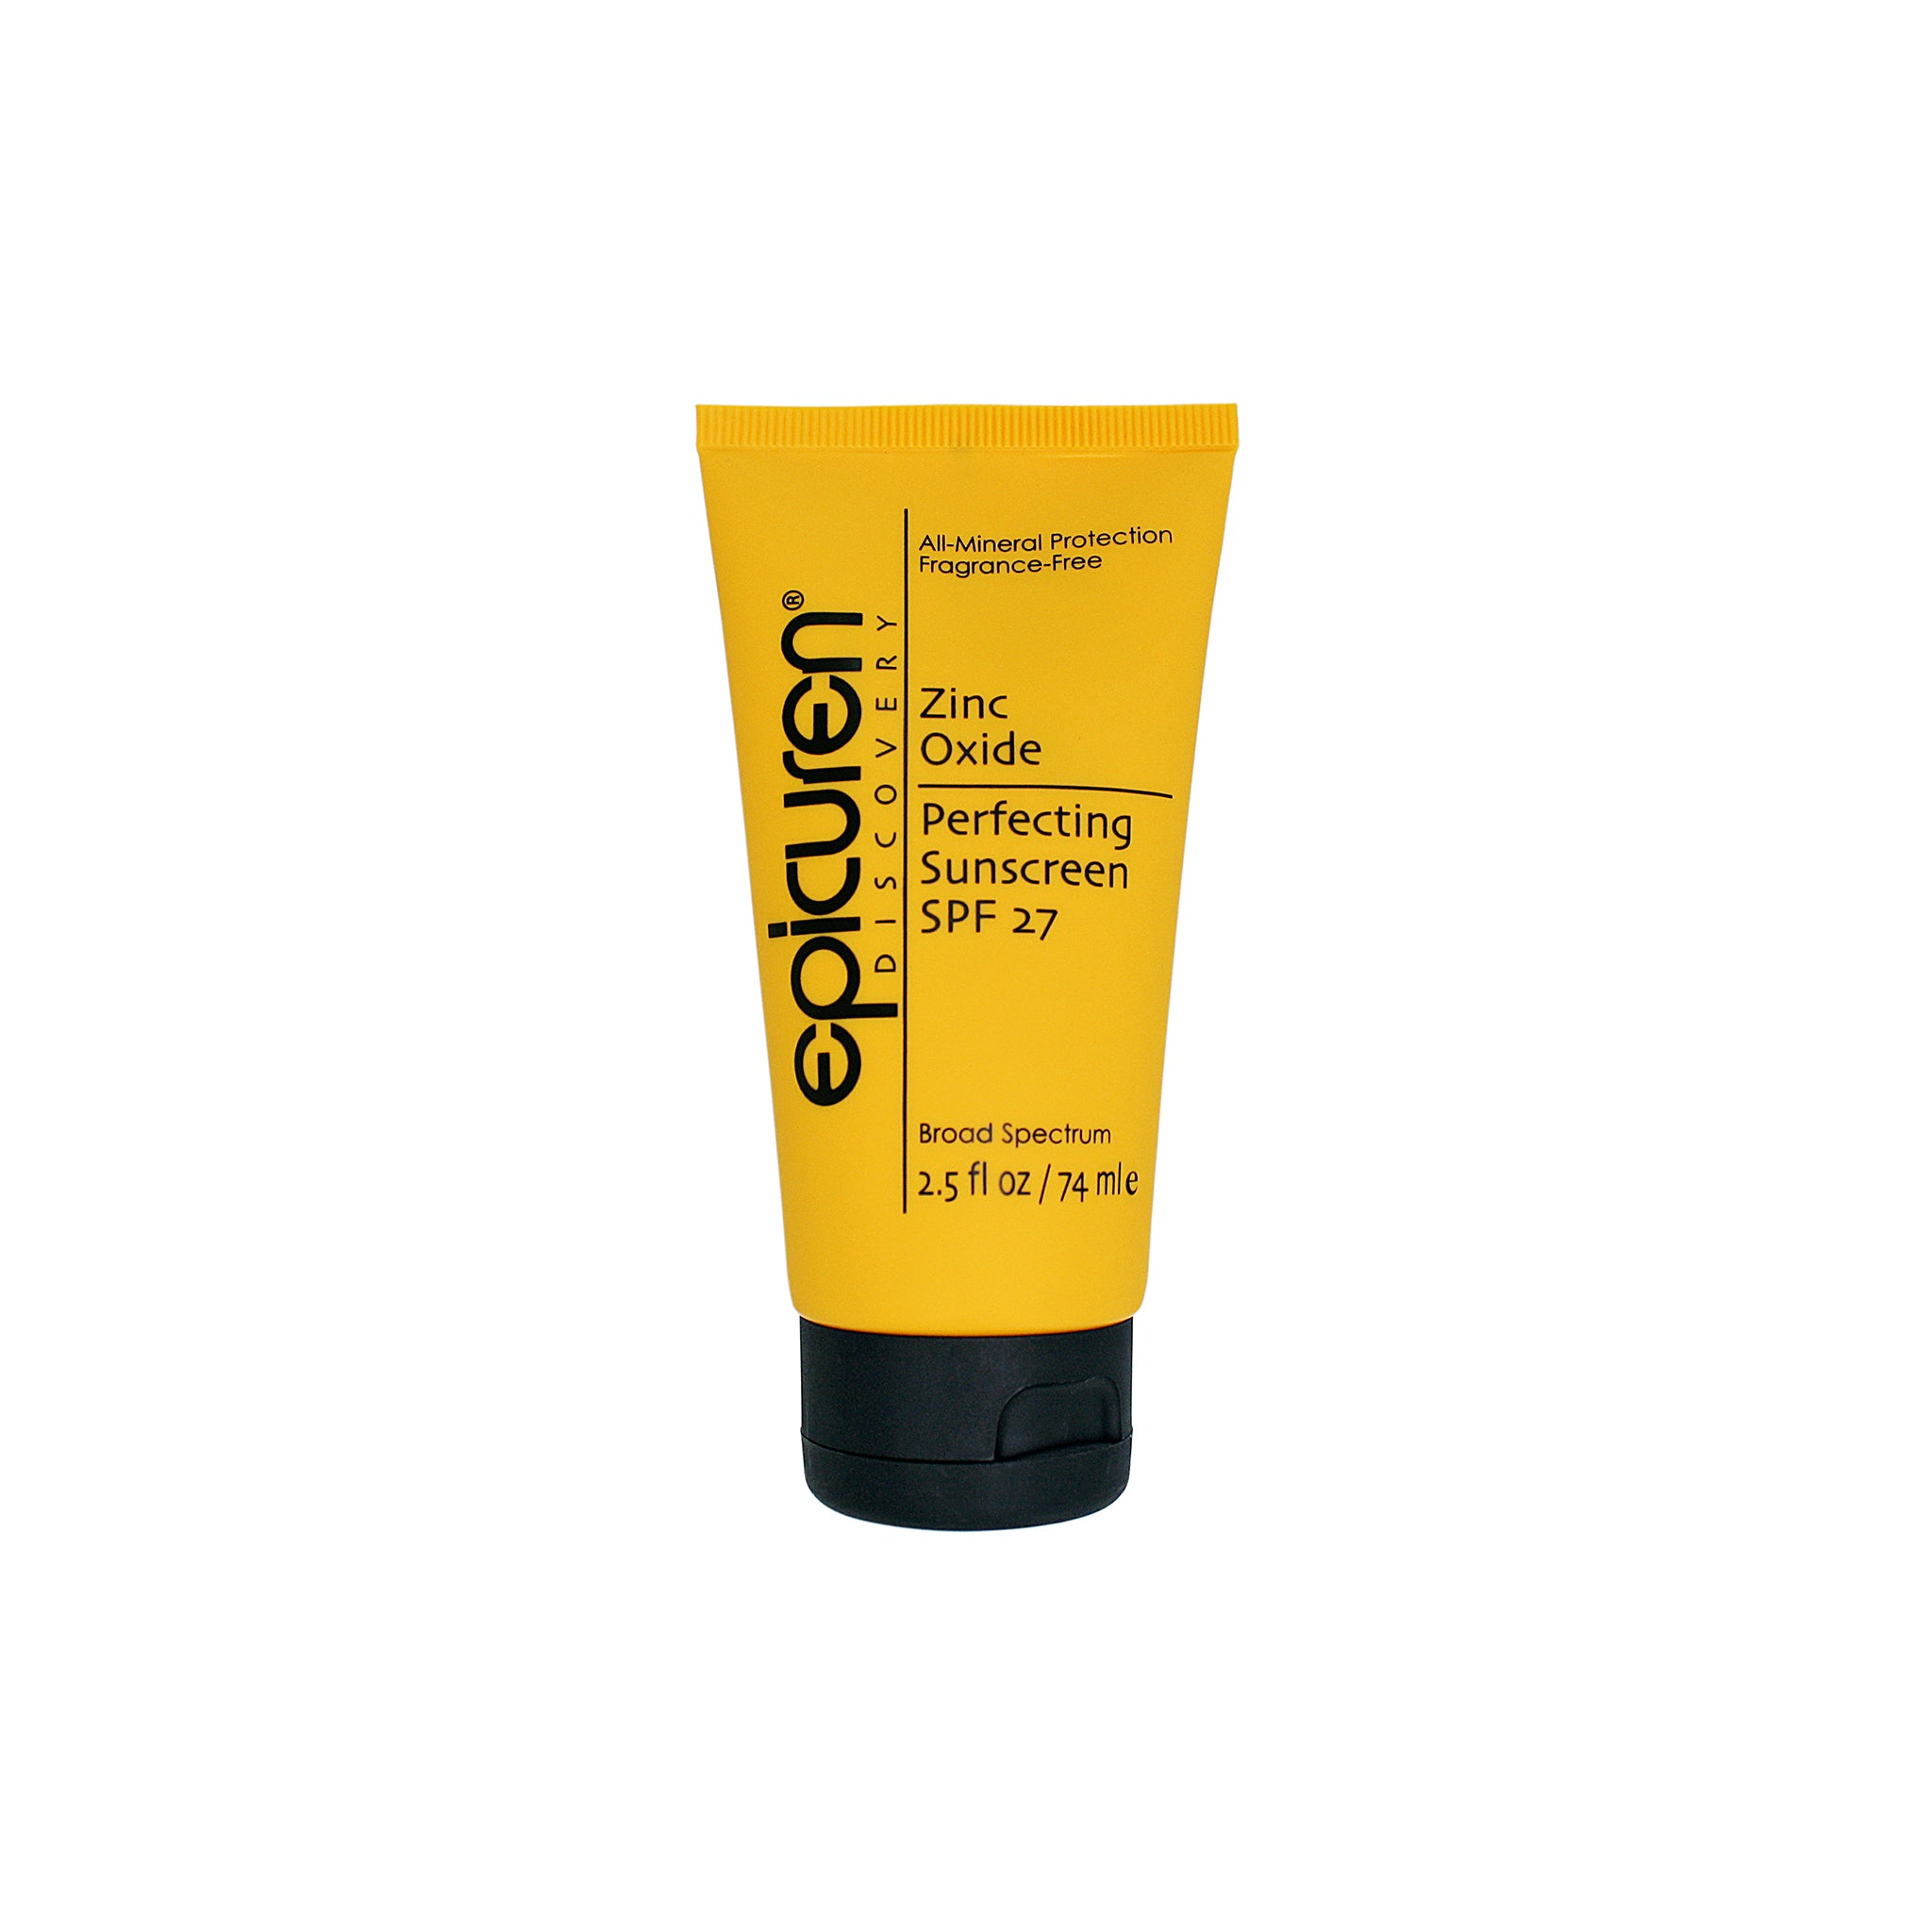 A yellow and black tube of Zinc Oxide Perfecting Sunscreen SPF 27. 